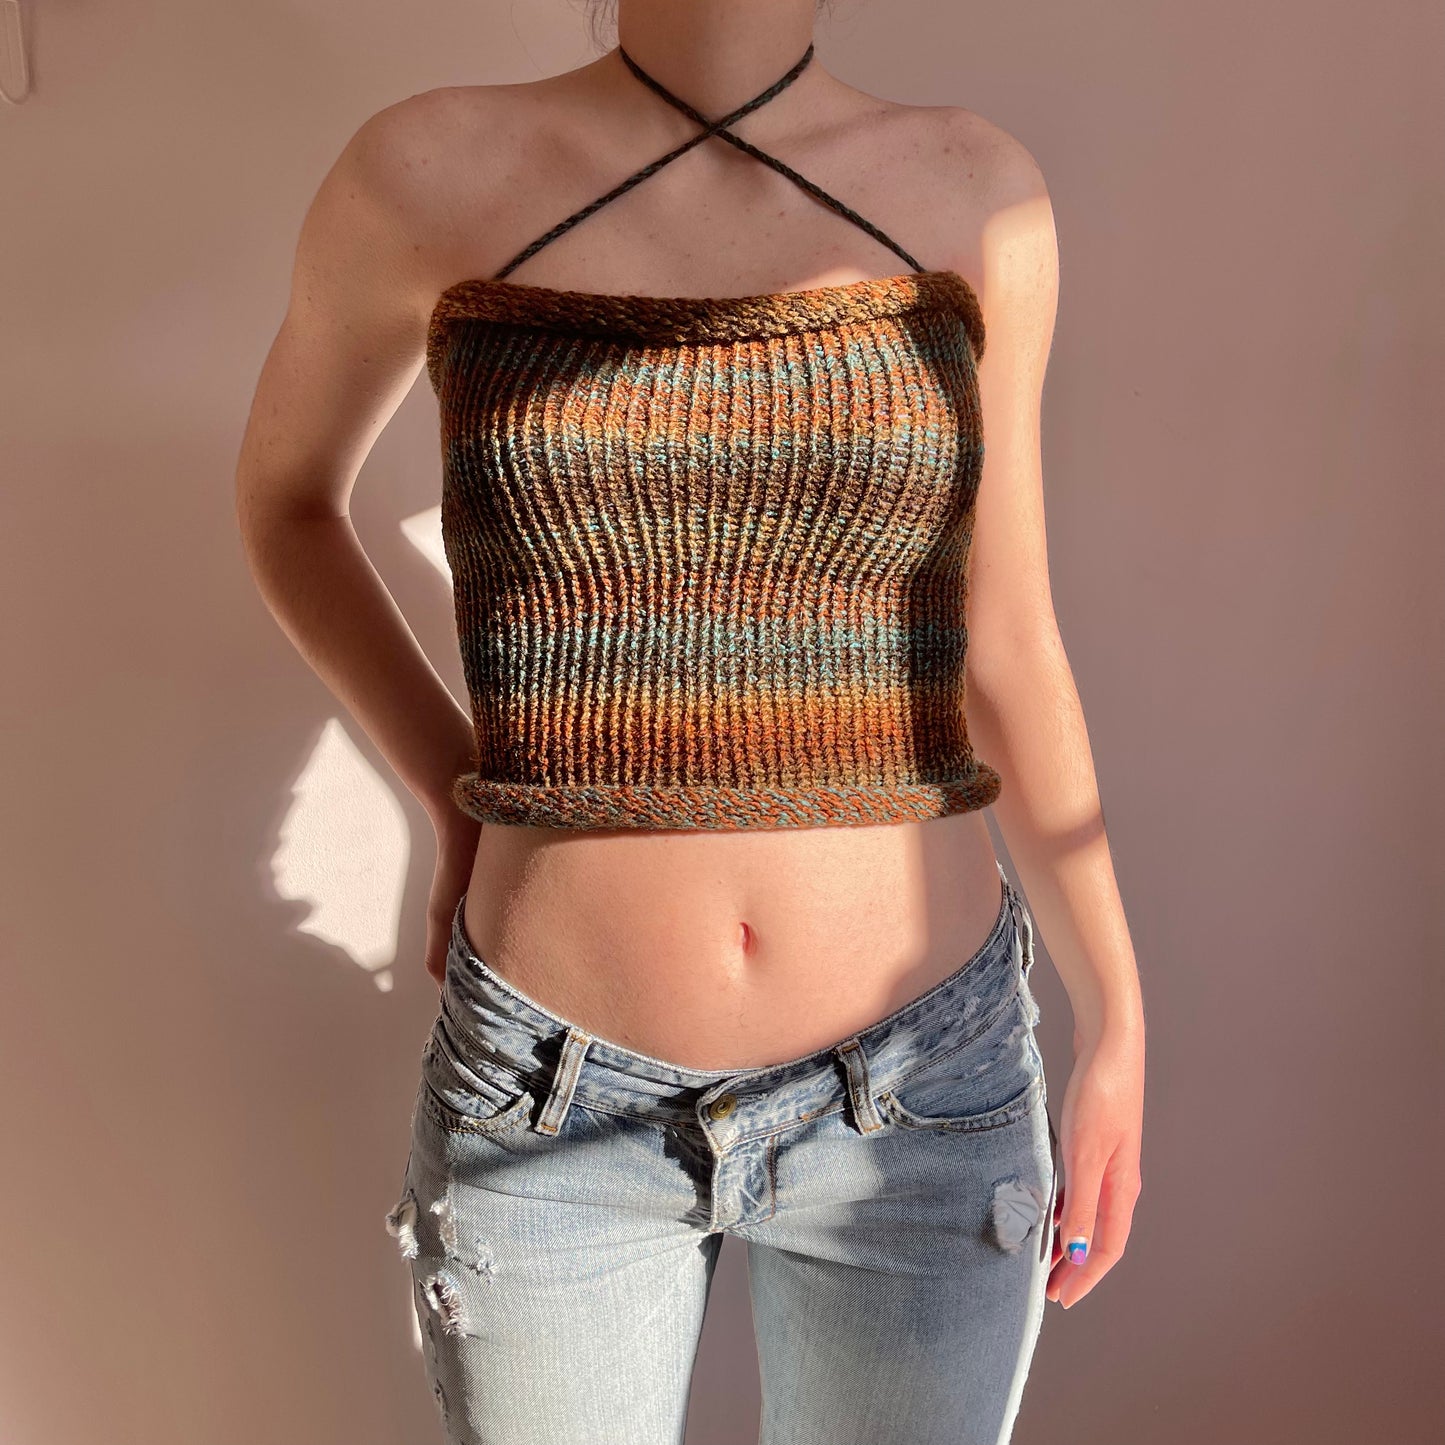 Handmade knitted halter top in brown and blue shades